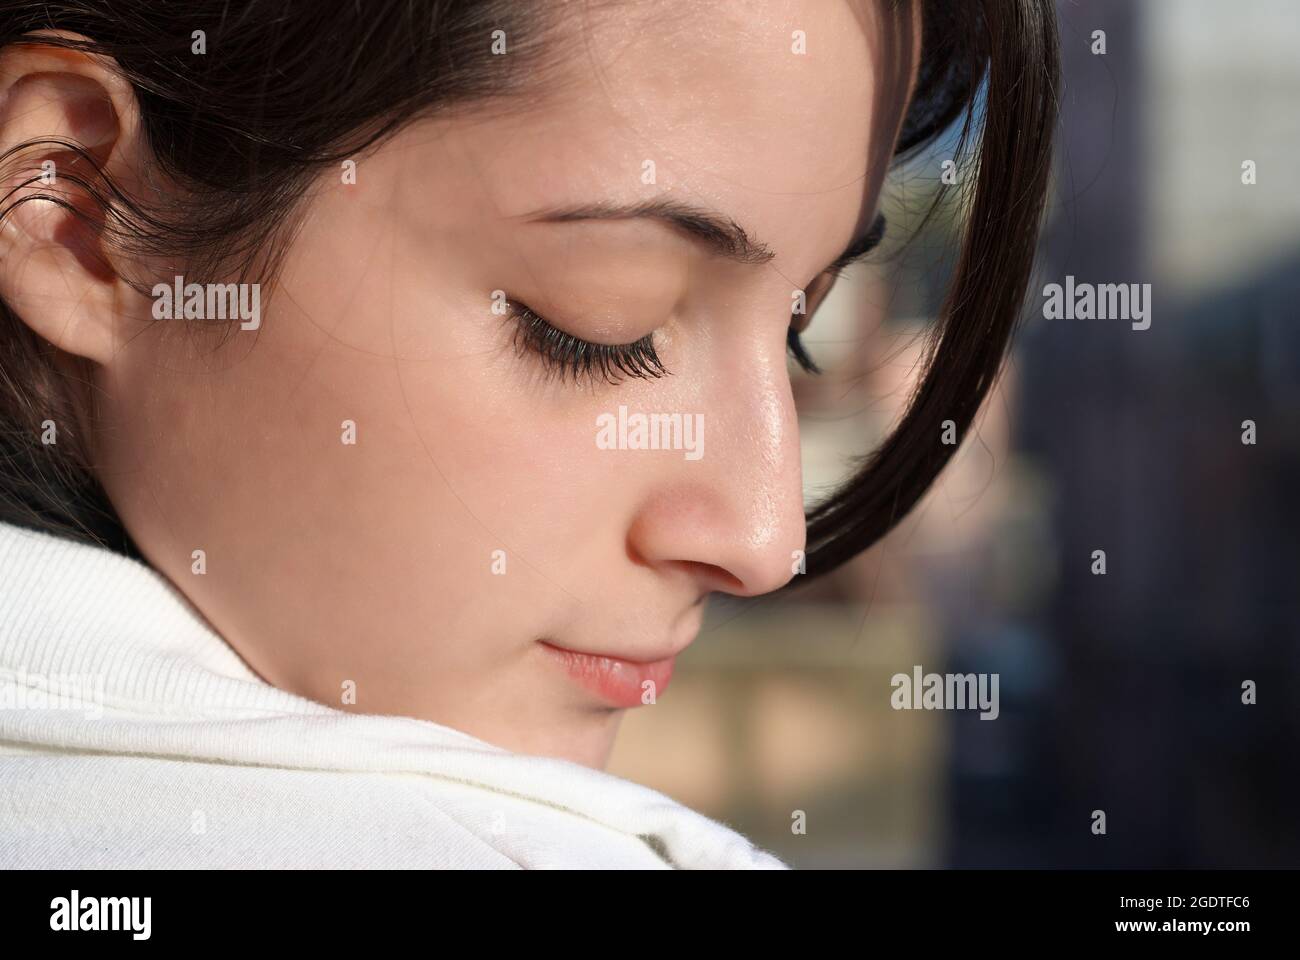 close up portrait of girl face profile photo with close eyes Stock Photo